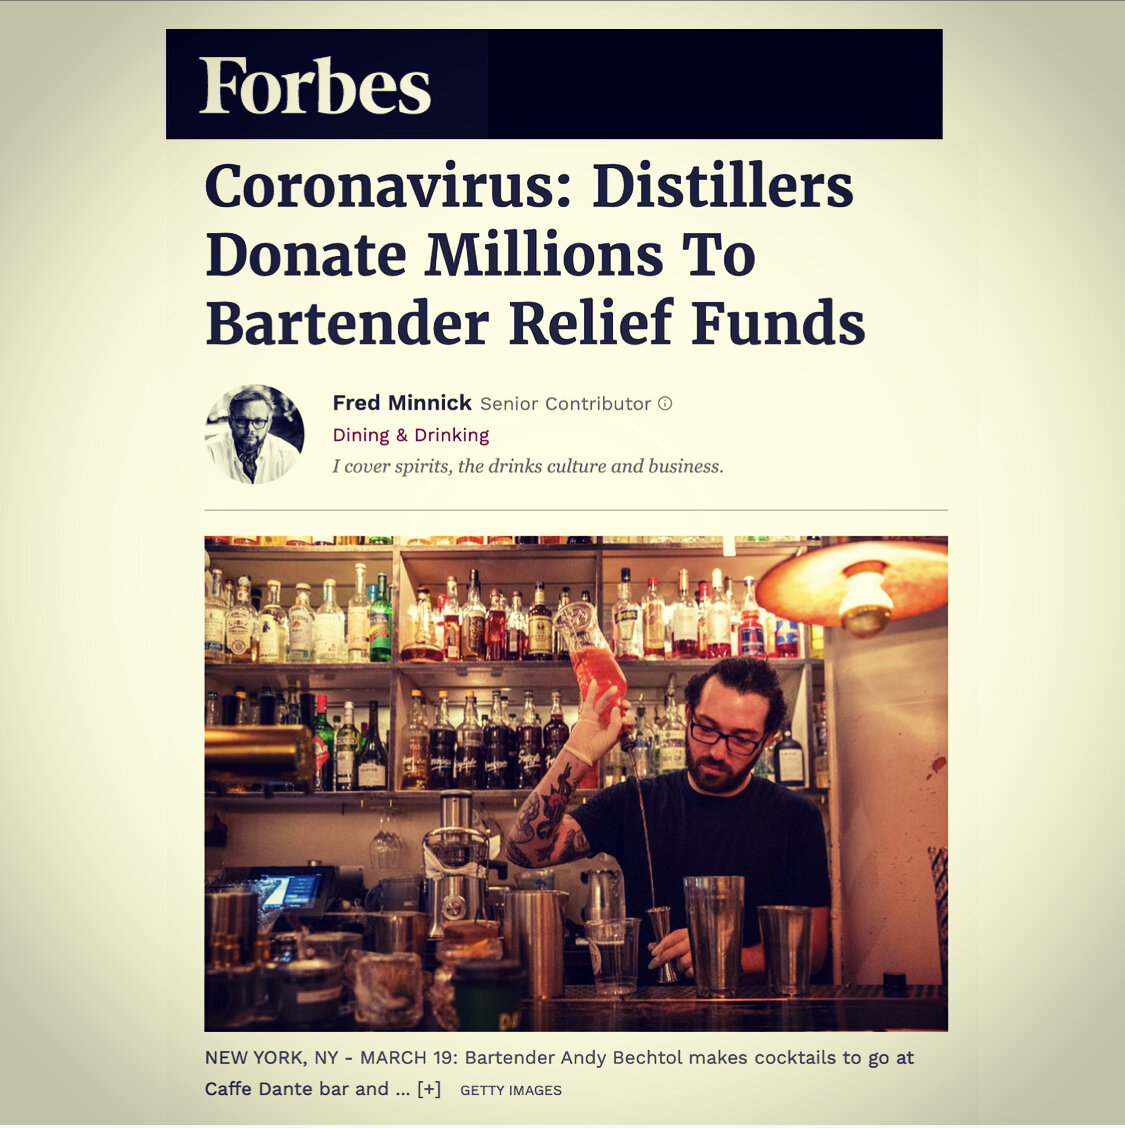 Spirits Brands Donate Millions to Aid Bartenders (Copy)